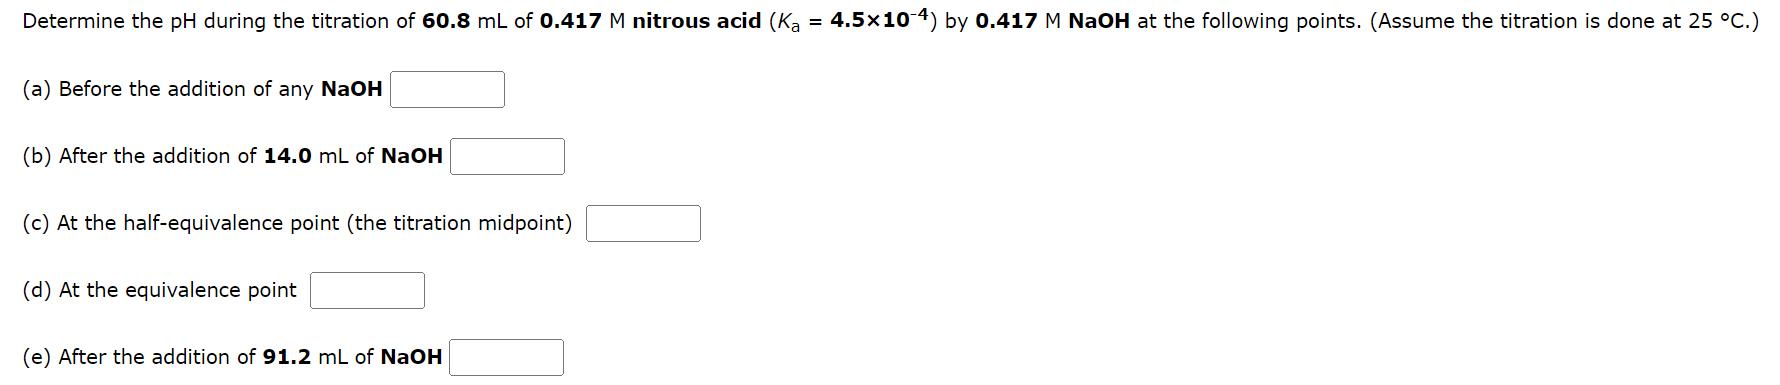 Determine the pH during the titration of ( 60.8 mathrm{~mL} ) of ( 0.417 mathrm{M} ) nitrous acid ( left(K_{mathrm{a